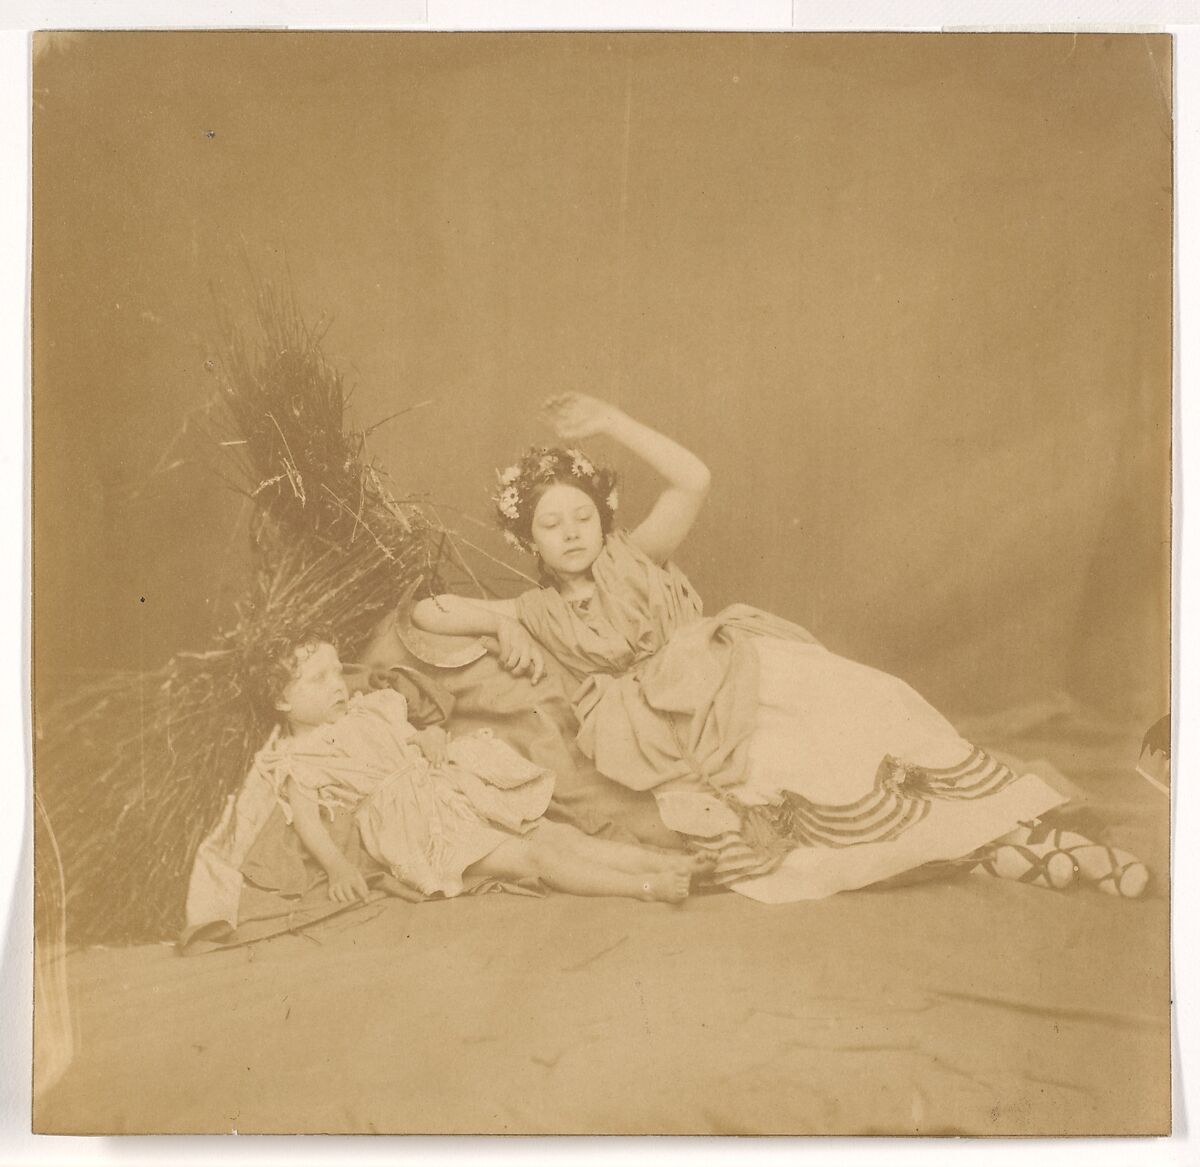 [Royal Children in Tableau of the Seasons], Roger Fenton (British, 1819–1869), Albumen silver print from glass negative 